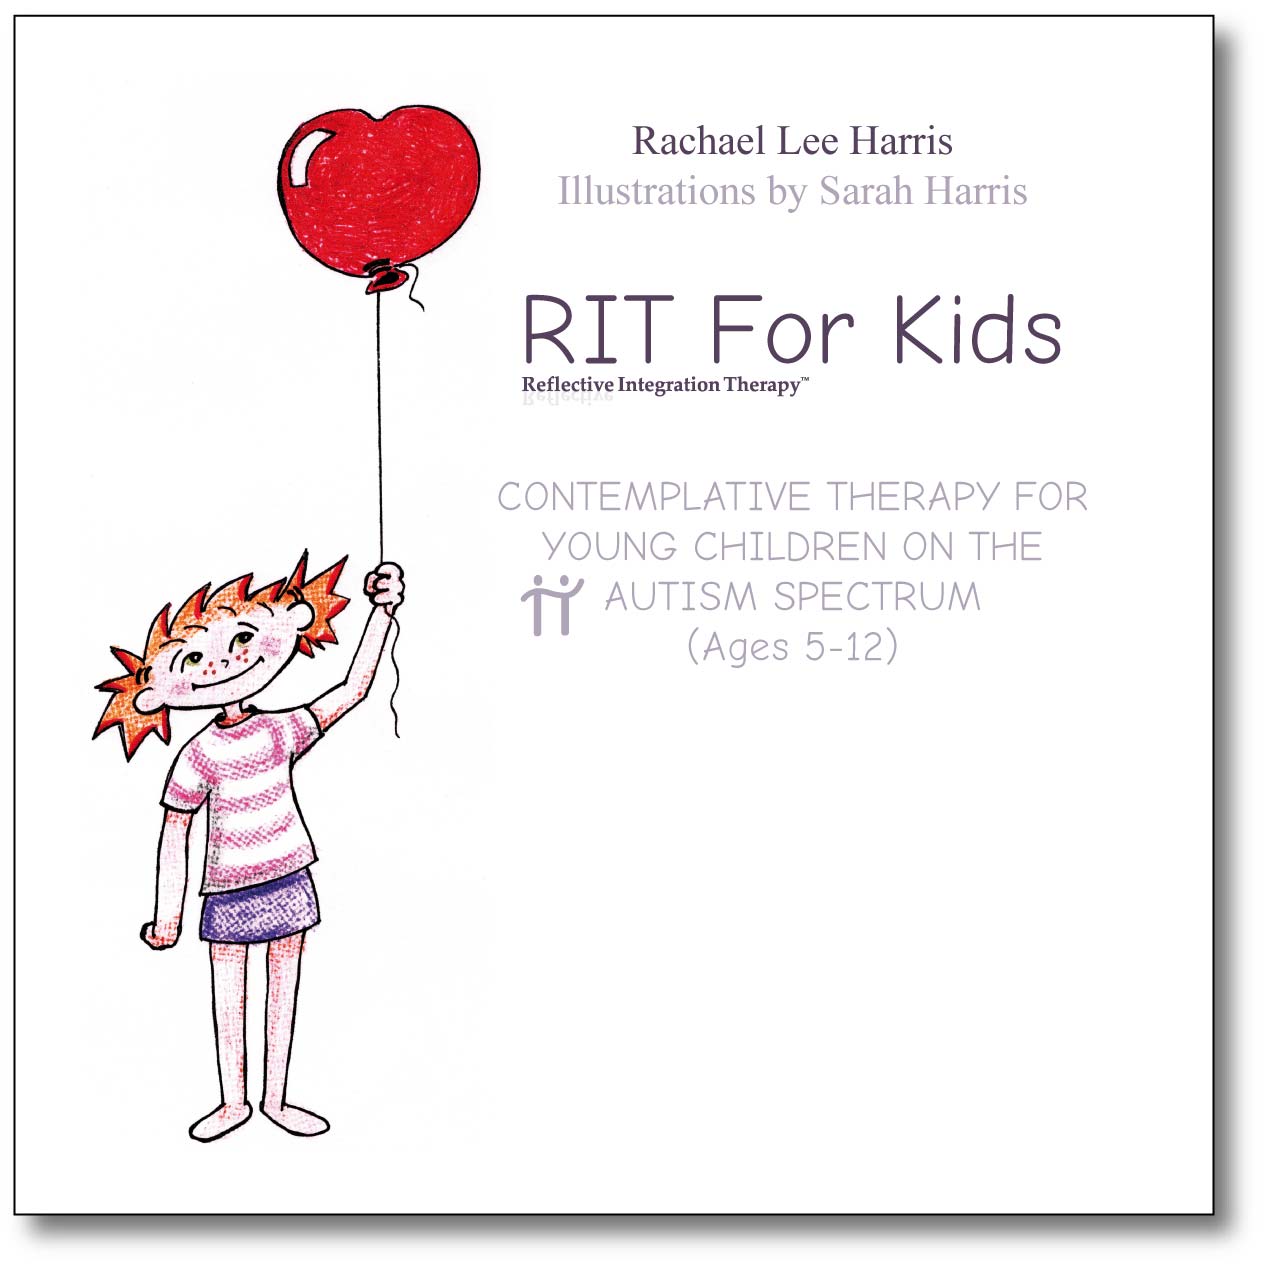 RIT For Kids - Contemplative Therapy For Young Children On The Autism Spectrum (Ages 5-12)